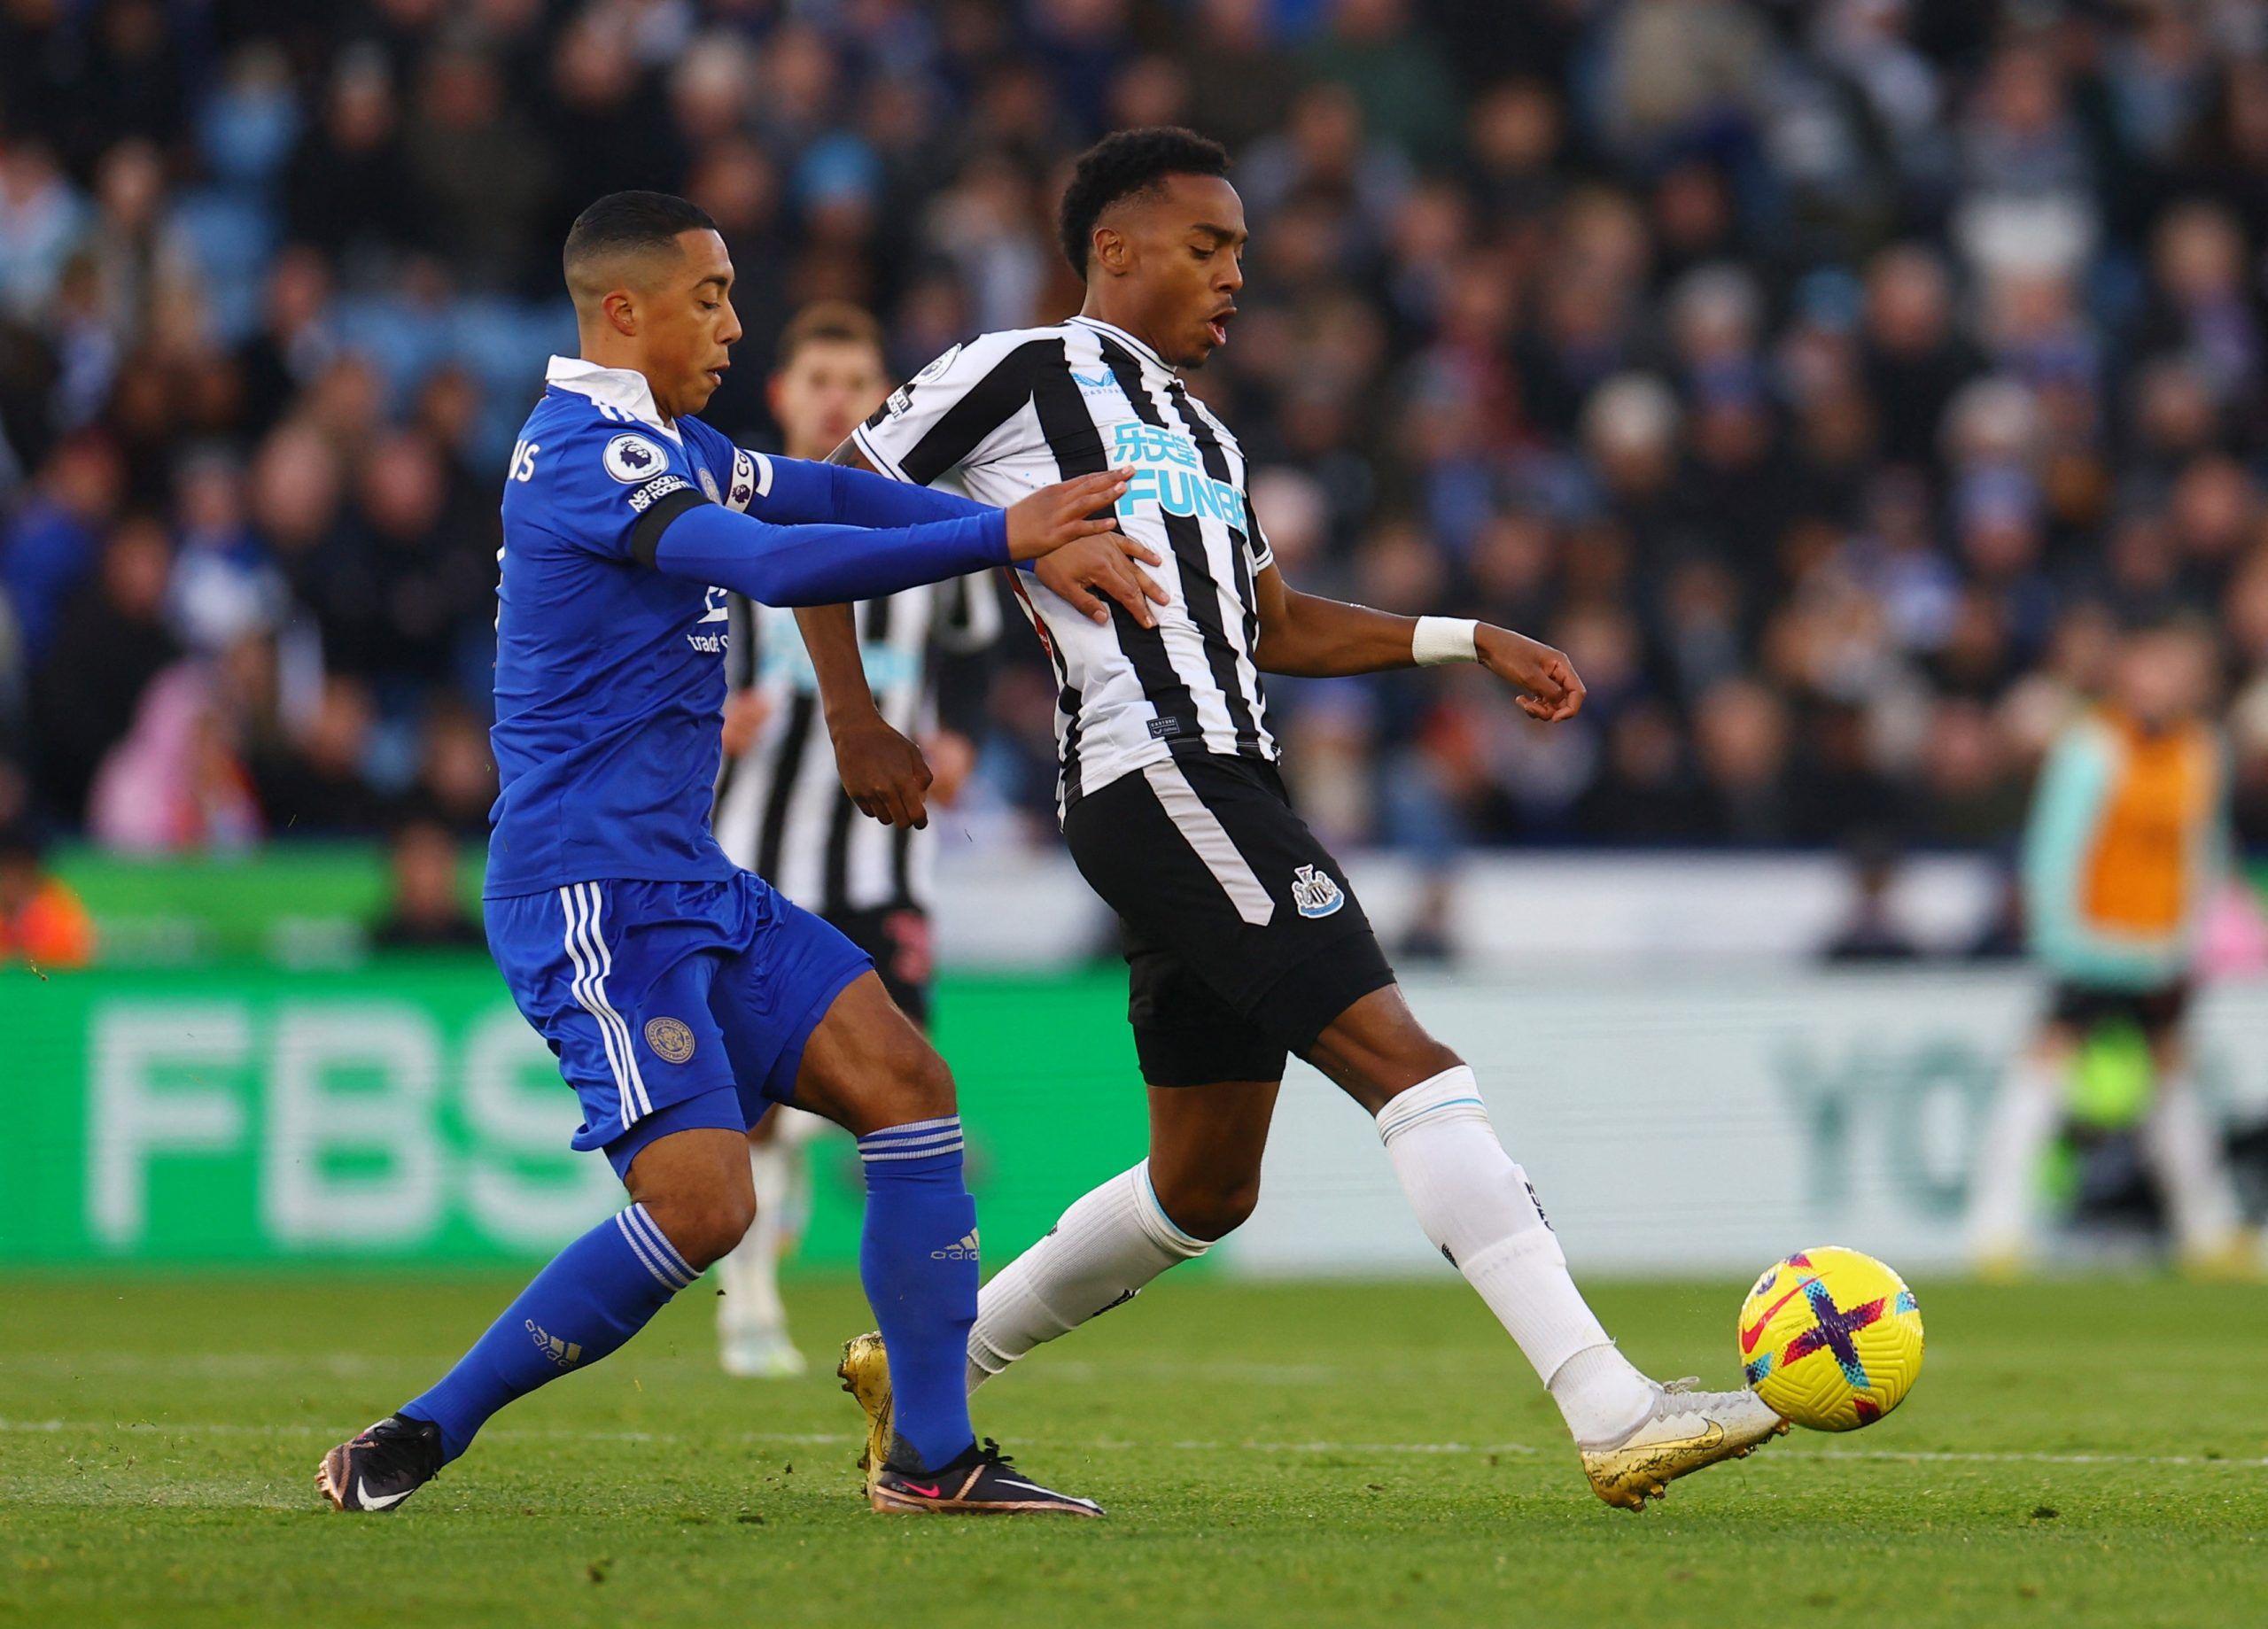 Soccer Football - Premier League - Leicester City v Newcastle United - King Power Stadium, Leicester, Britain - December 26, 2022 Leicester City's Youri Tielemans in action with Newcastle United's Joe Willock REUTERS/Molly Darlington EDITORIAL USE ONLY. No use with unauthorized audio, video, data, fixture lists, club/league logos or 'live' services. Online in-match use limited to 75 images, no video emulation. No use in betting, games or single club /league/player publications.  Please contact y